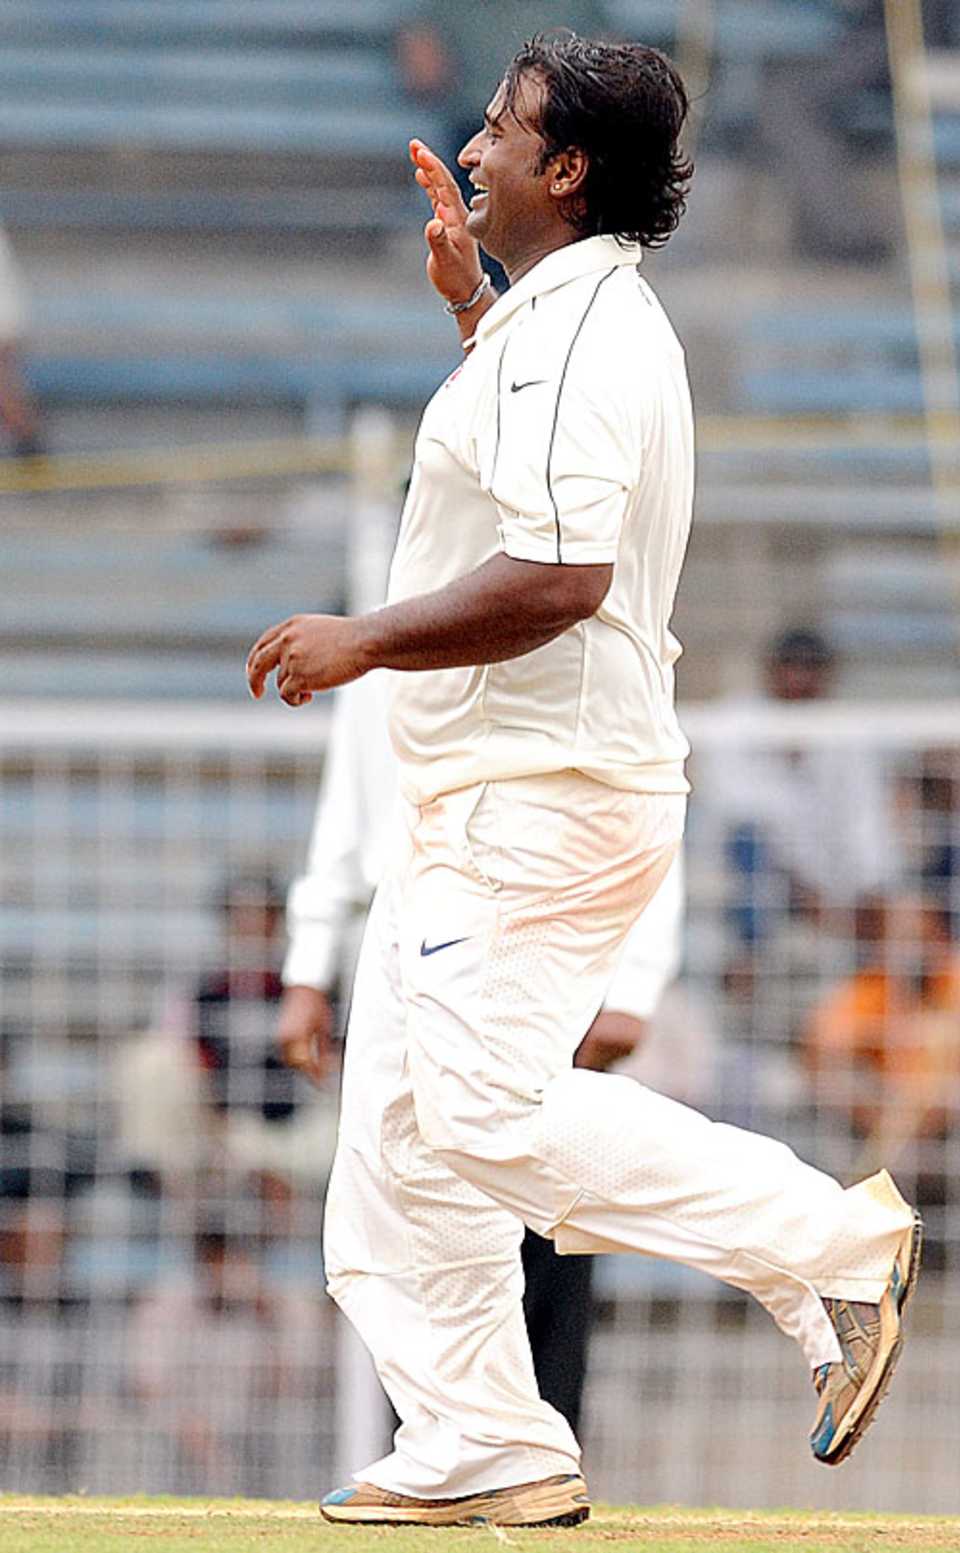 Ramesh Powar took 4 for 108 to seal a spot in the final for Mumbai